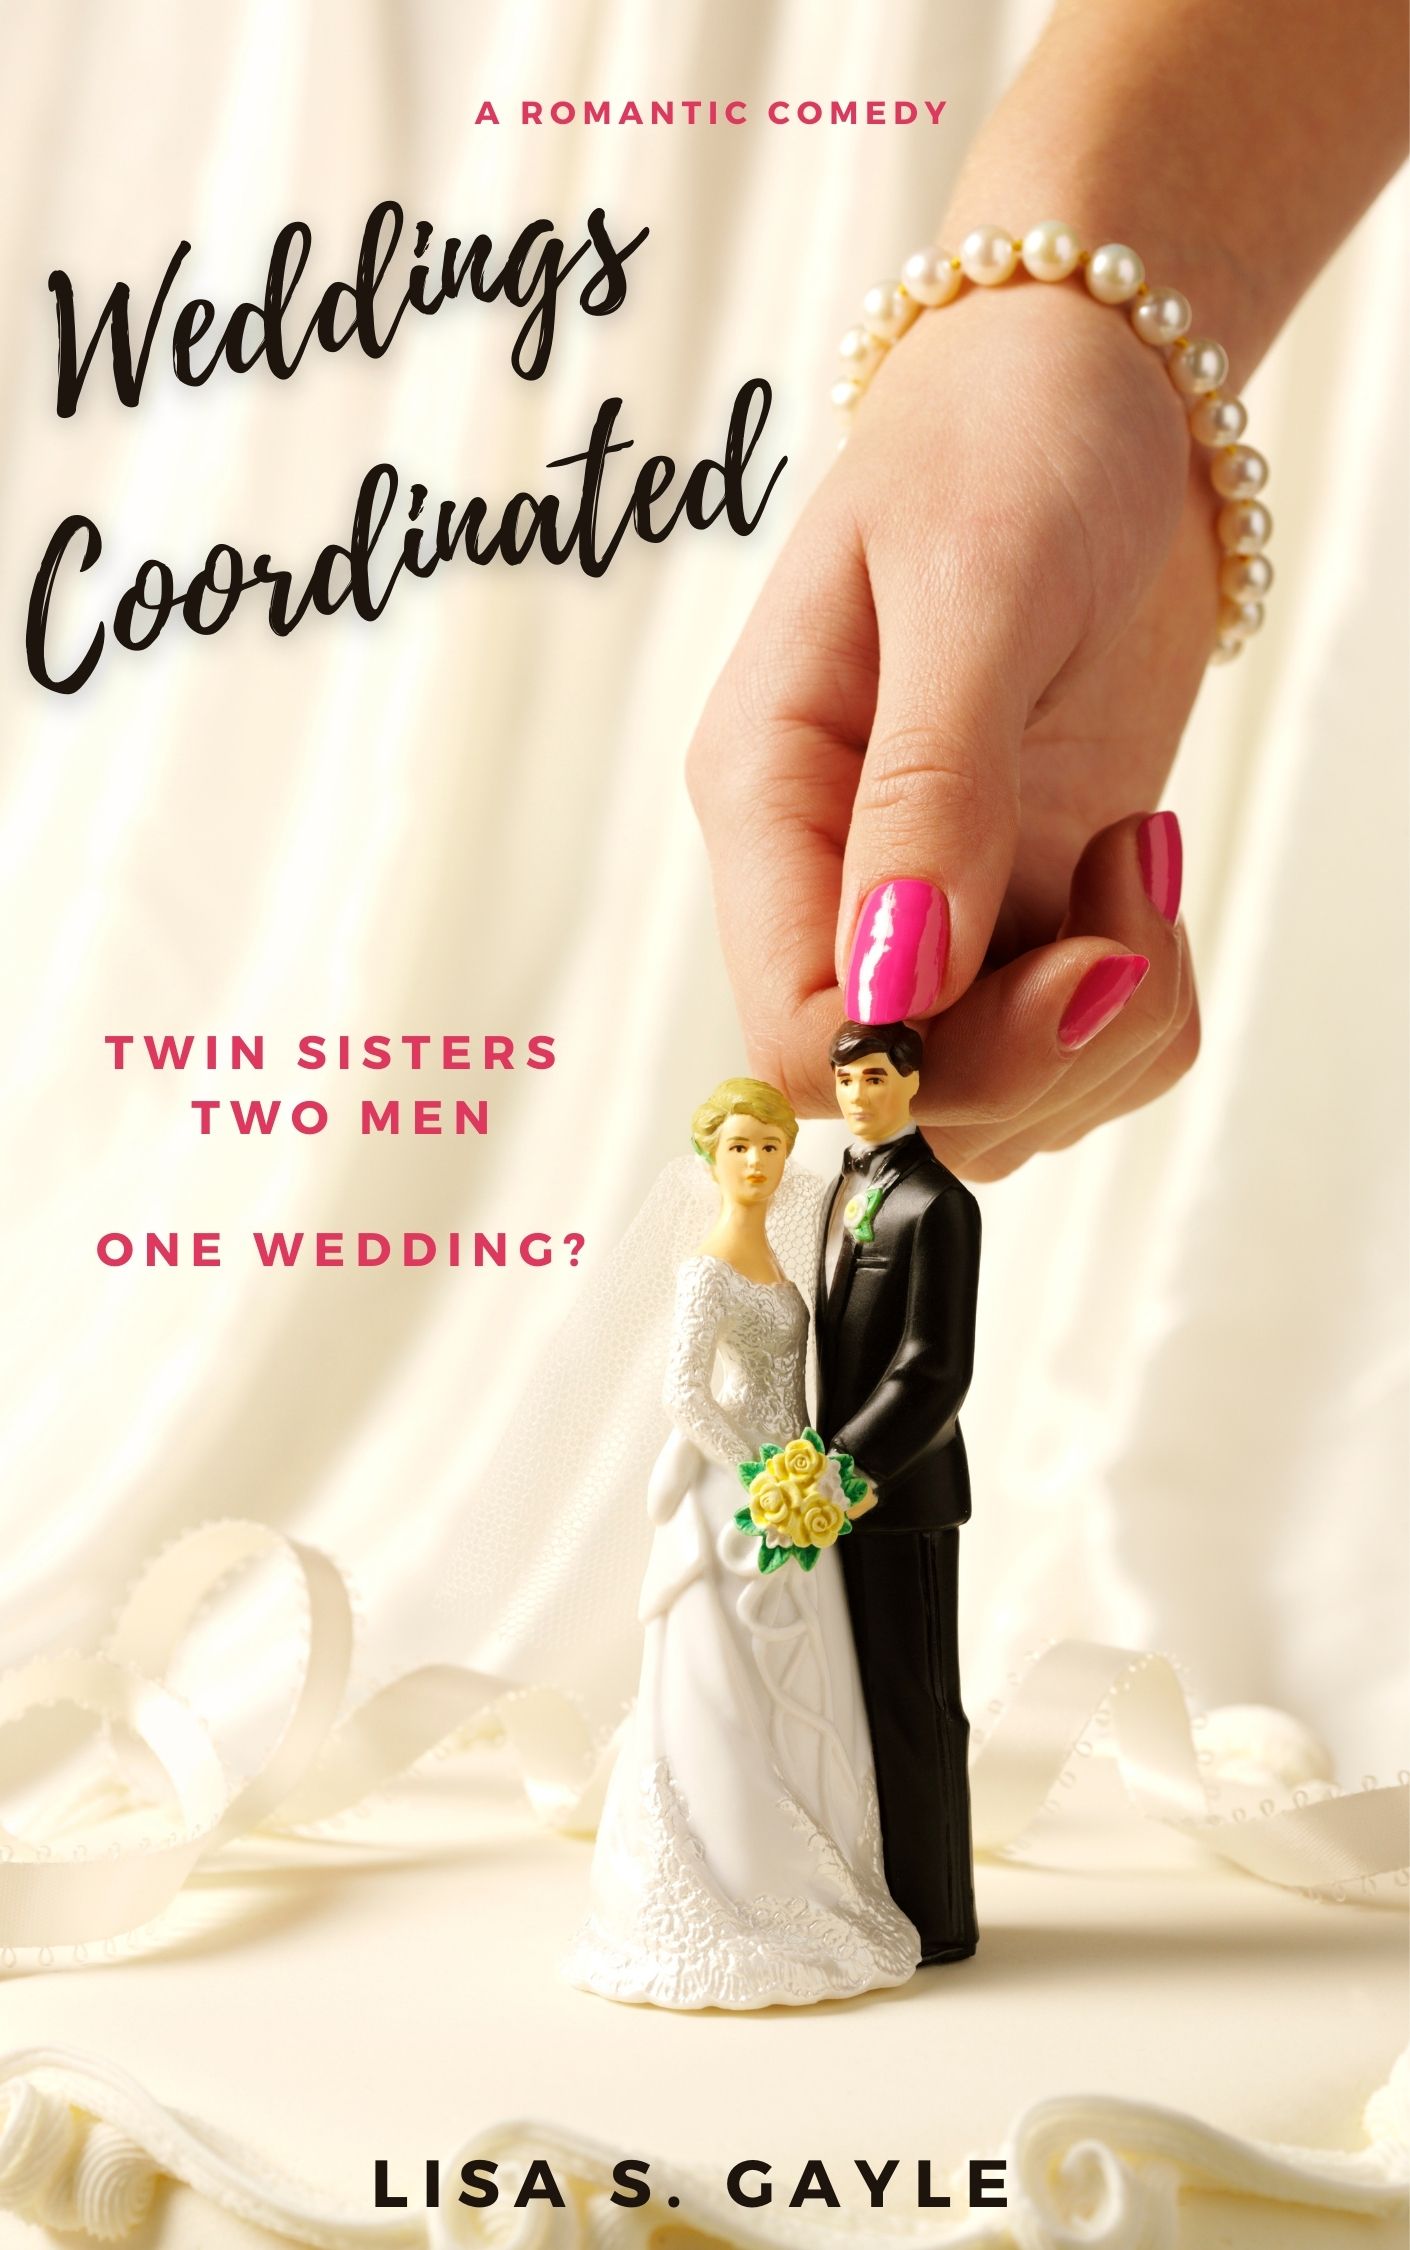 FREE: Weddings Coordinated: A Romantic Comedy by Lisa S. Gayle